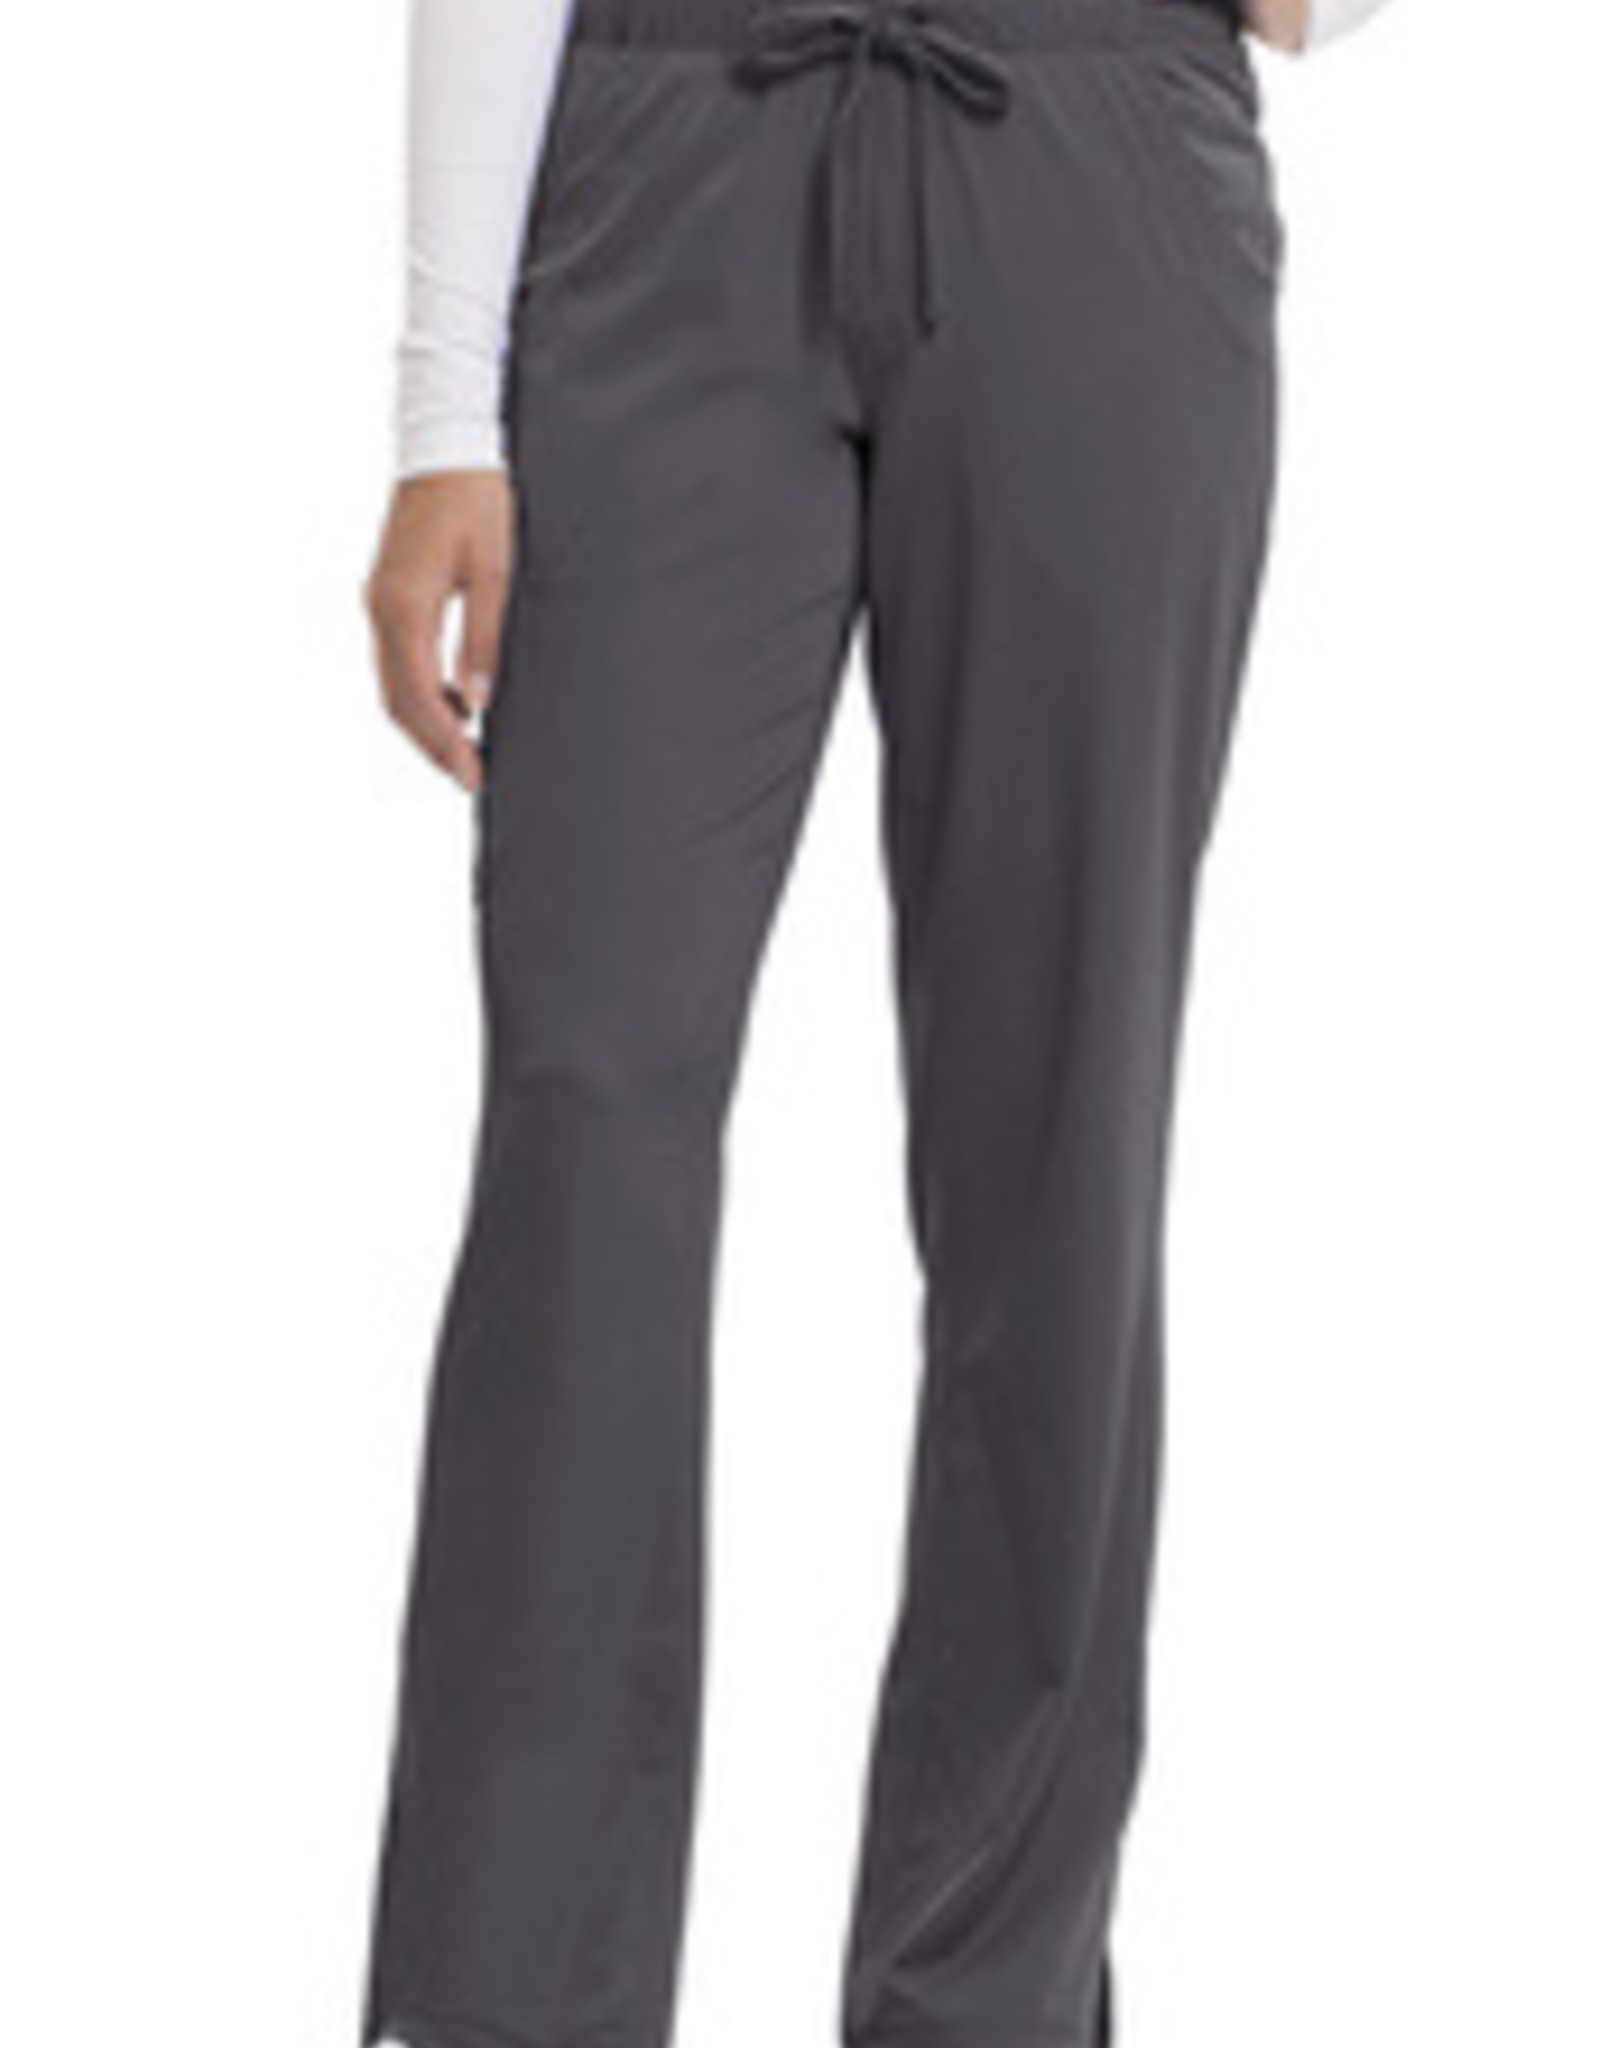 Healing Hands HH Works Women's "Rebecca" Pant (PLUS SIZES)